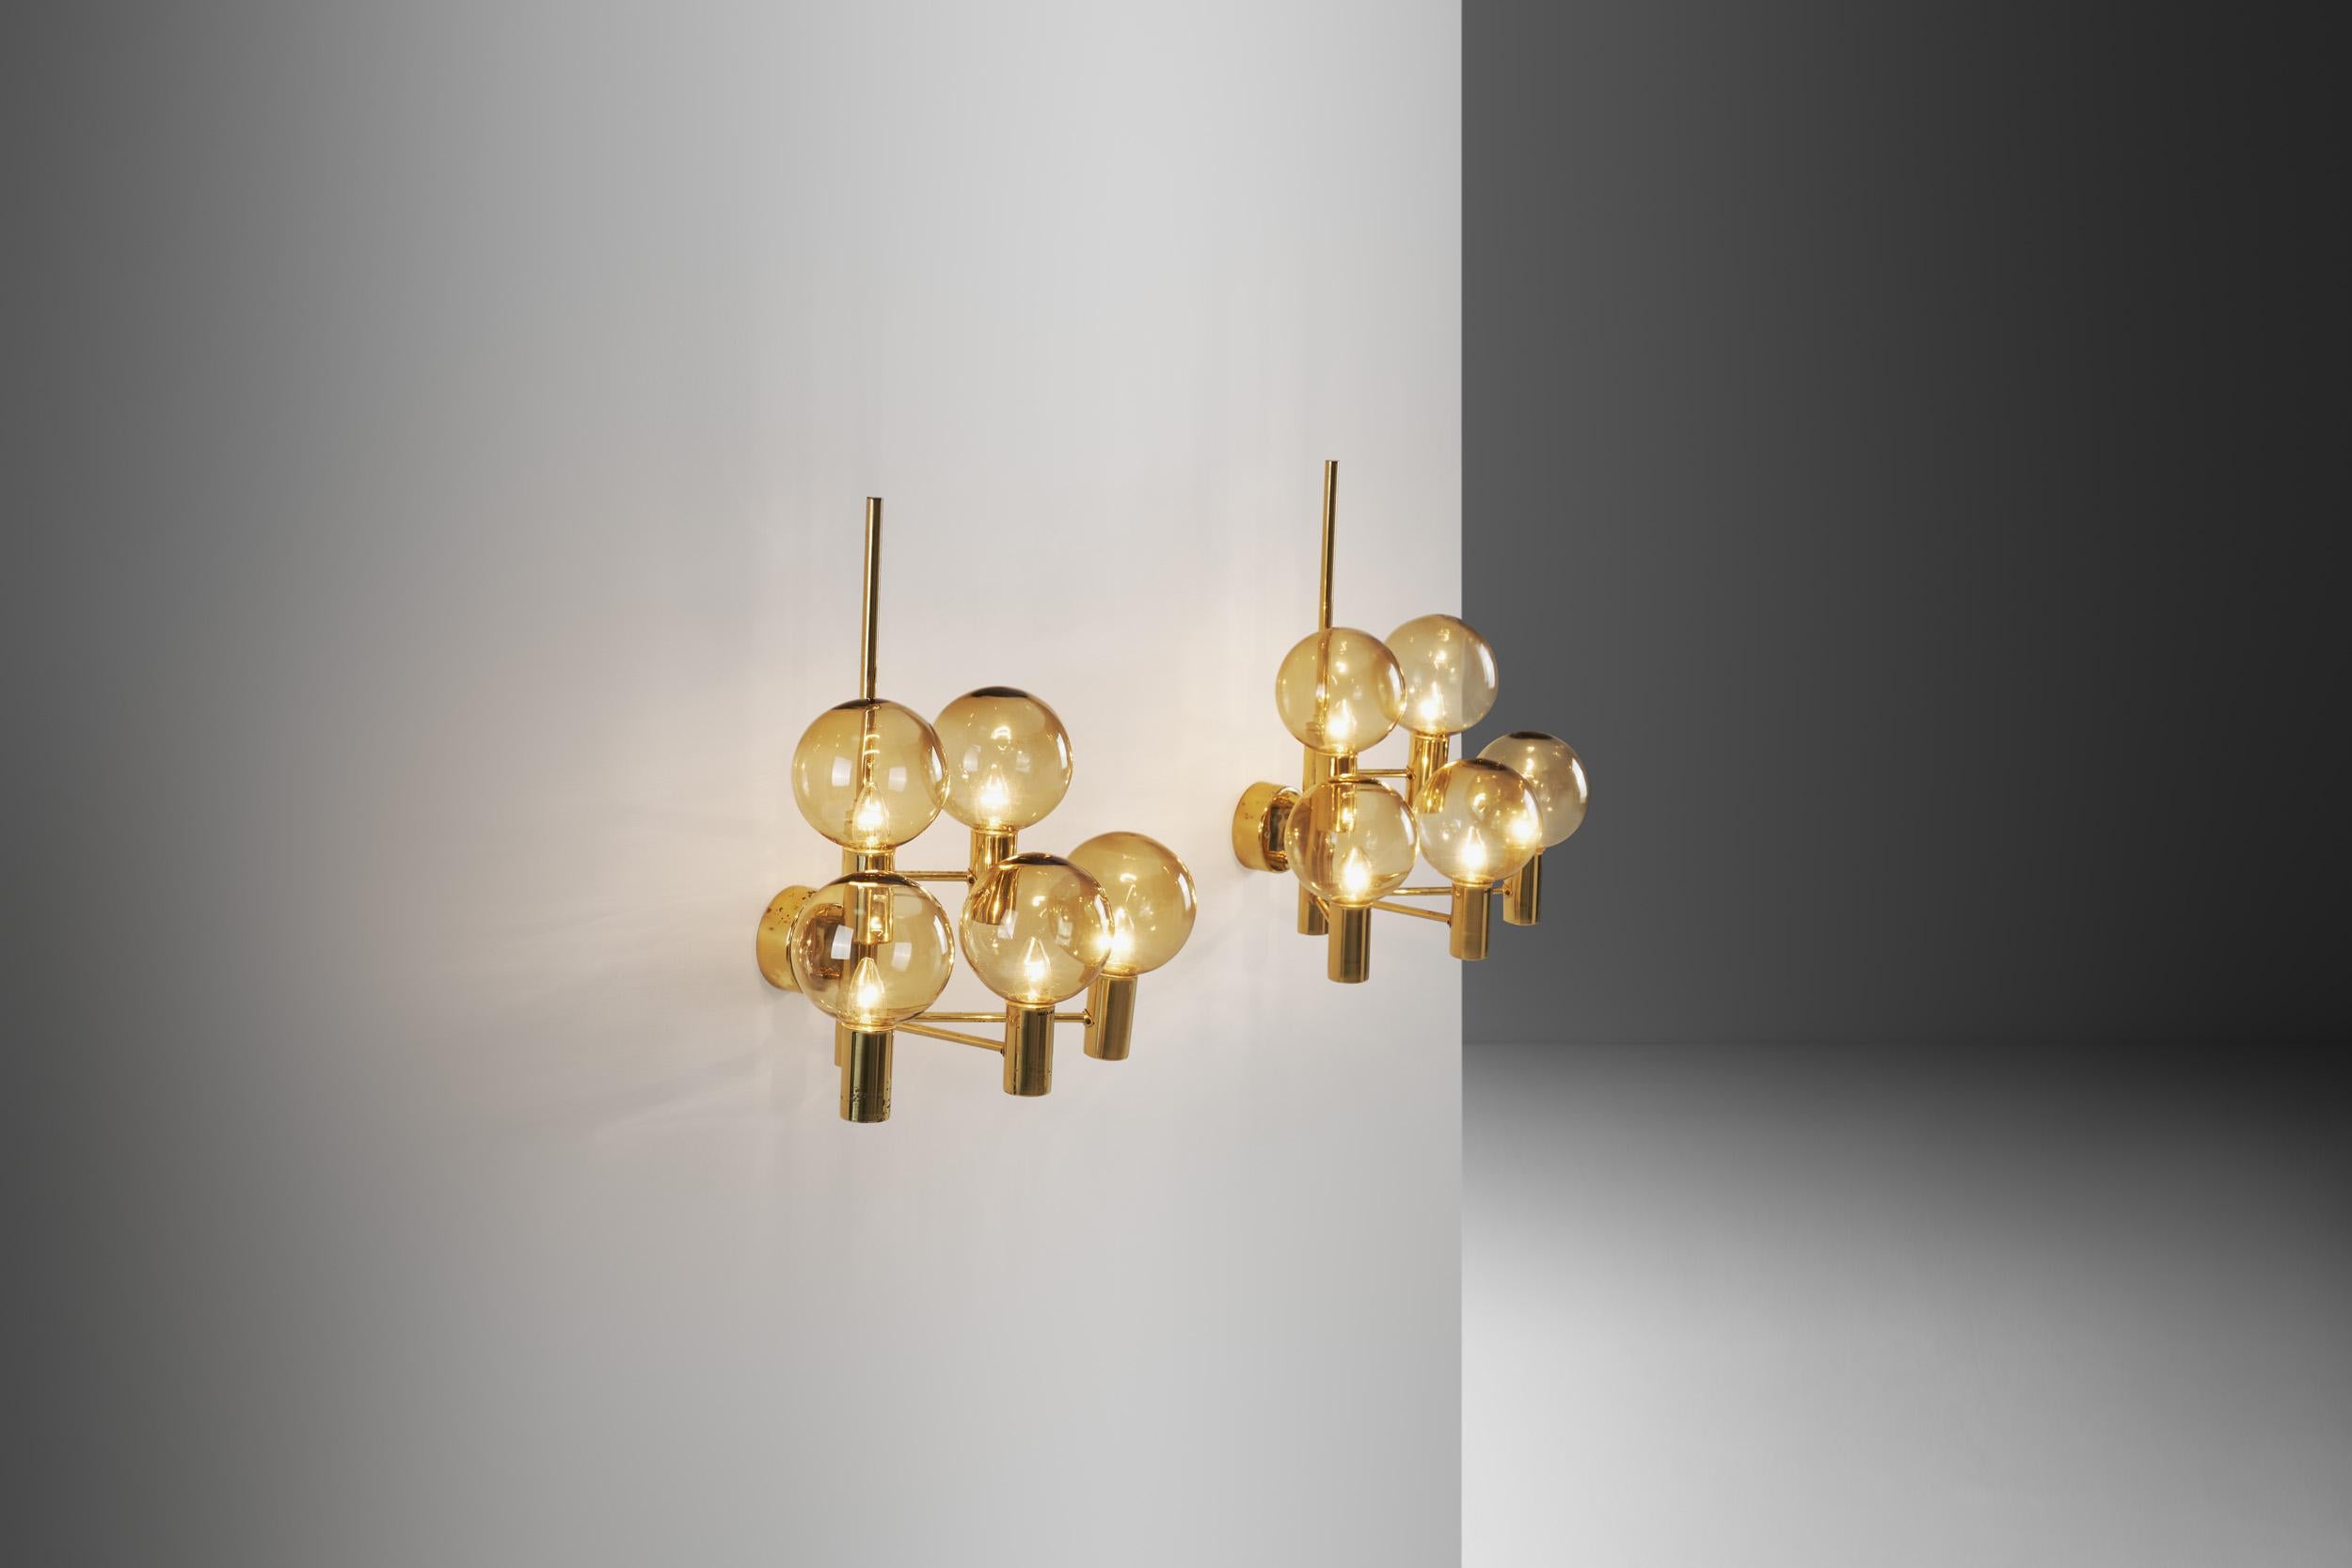 Swedish Hans-Agne Jakobsson Brass Wall Lamps with Smoked Glass Shades, Sweden 1960s For Sale